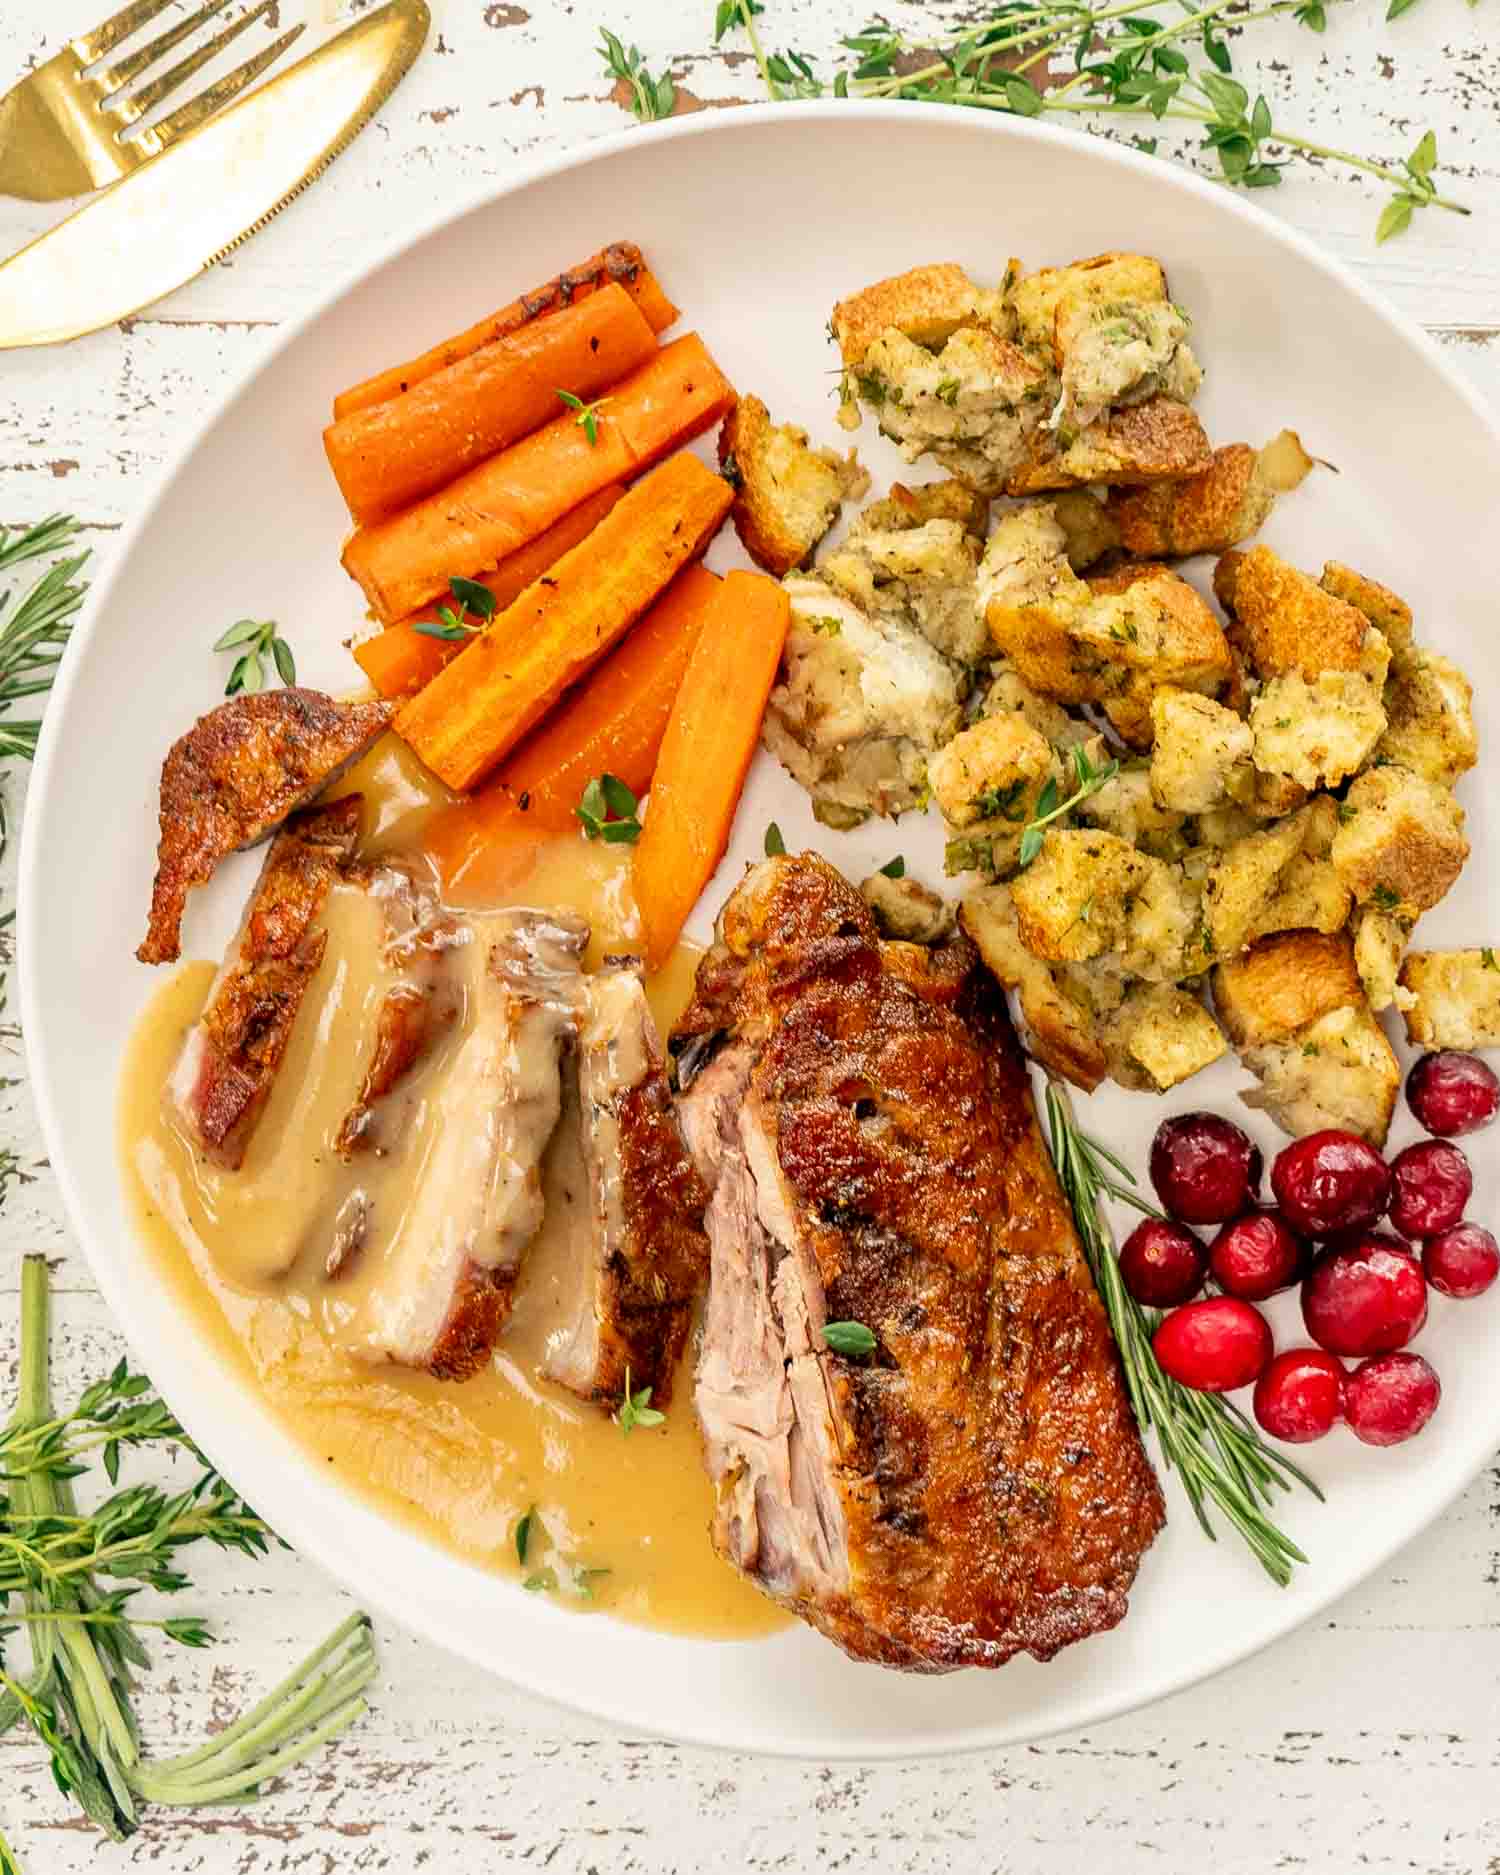 a maple mustard roasted turkey thigh sliced on a white plate along some stuffing and roasted carrots.